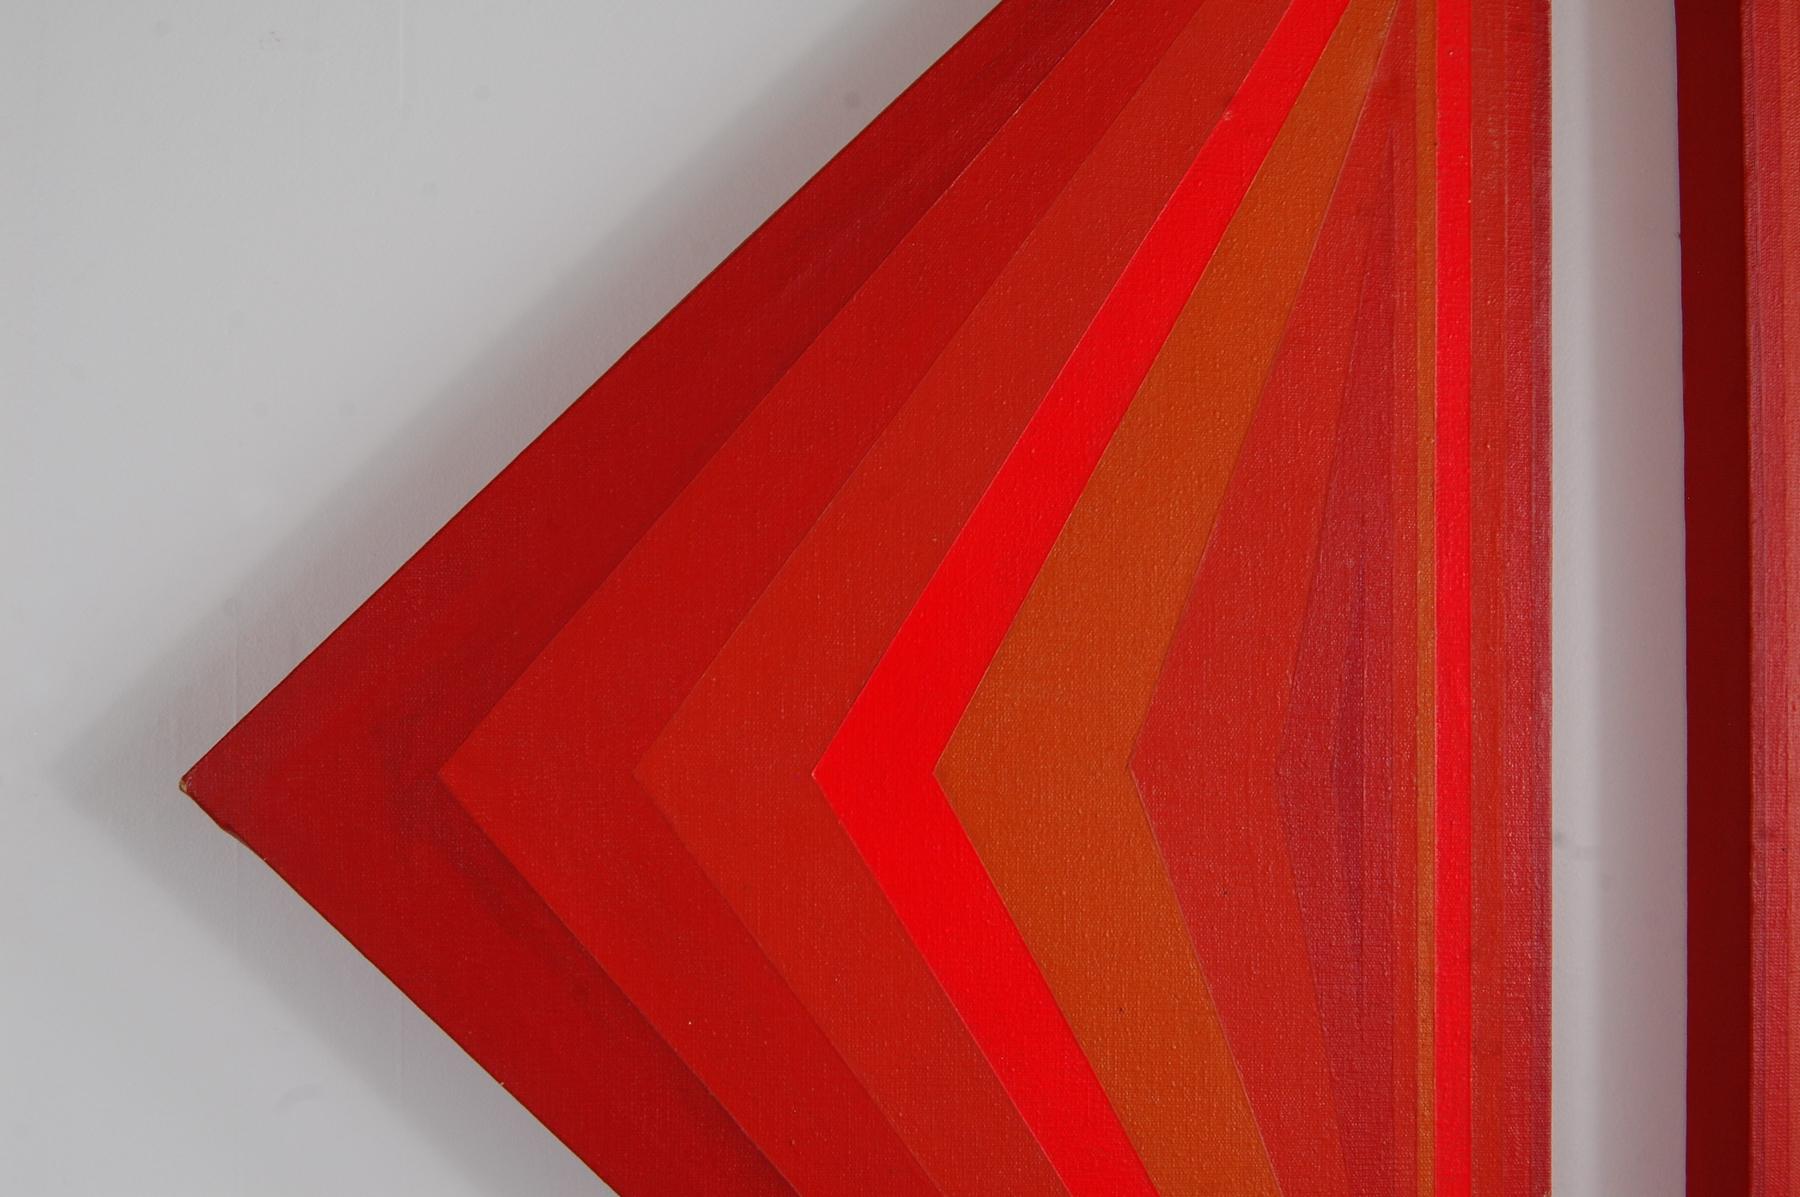 Hard-edge painting, circa 1972. Painting consists of two triangular elements. Unsigned.